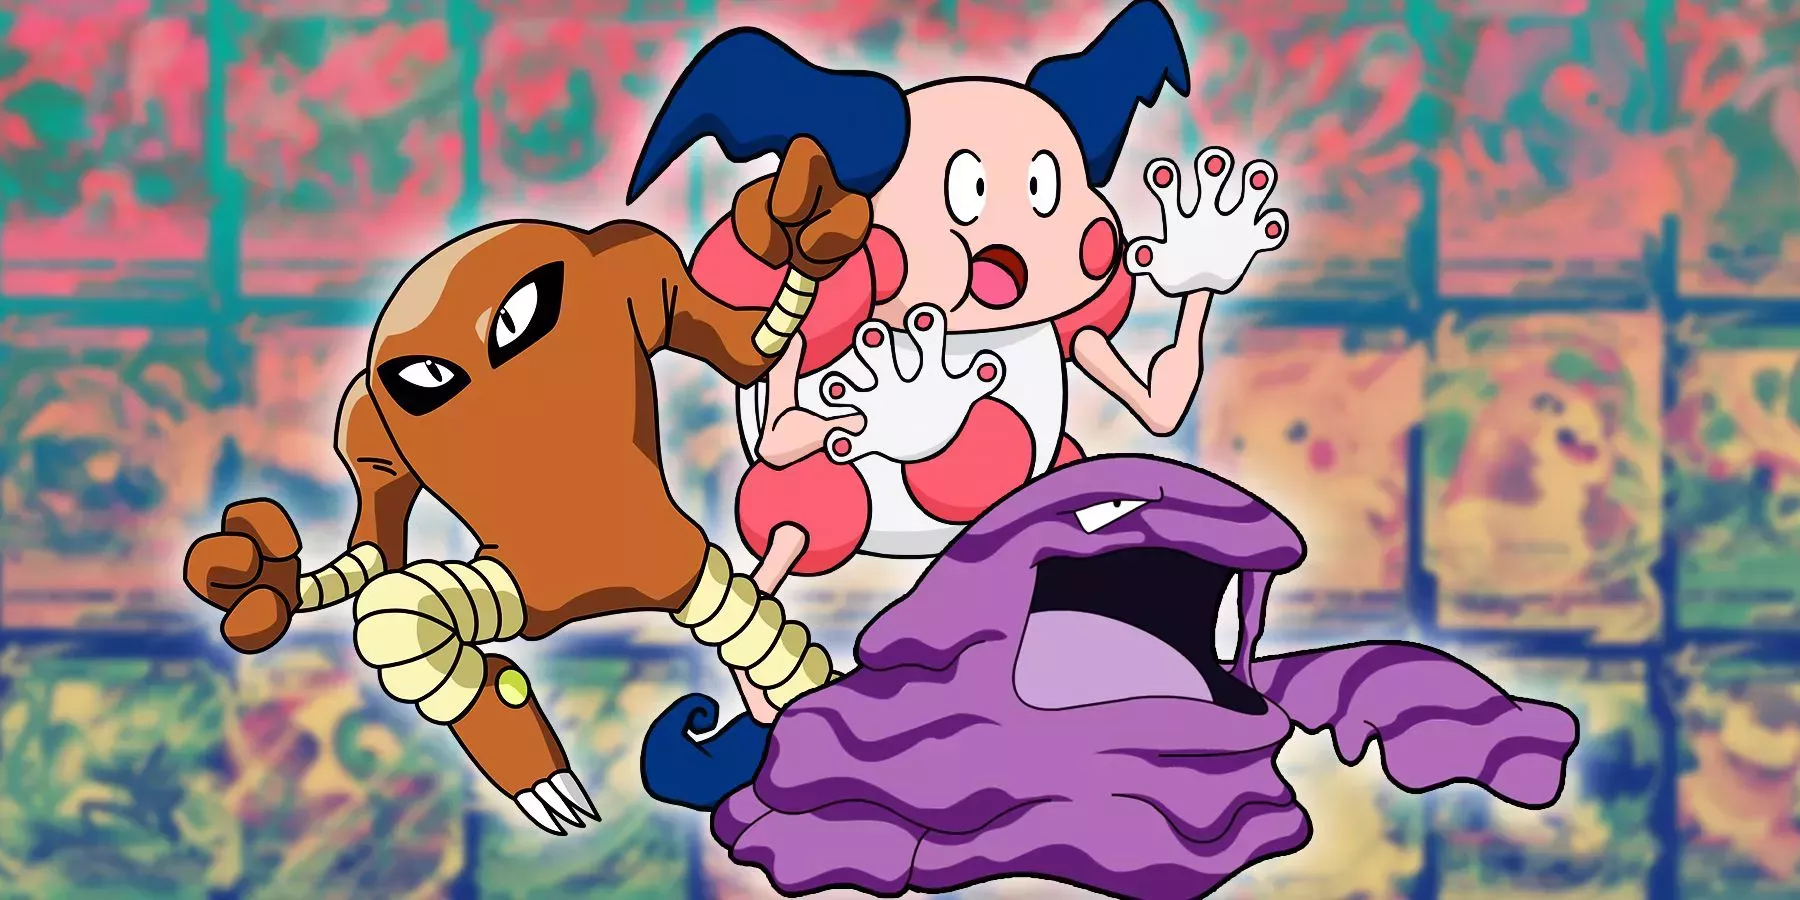 Hitmonlee, Muk, amd Mr. Mime from anime Pokémon in front of a collage of Pokémon cards